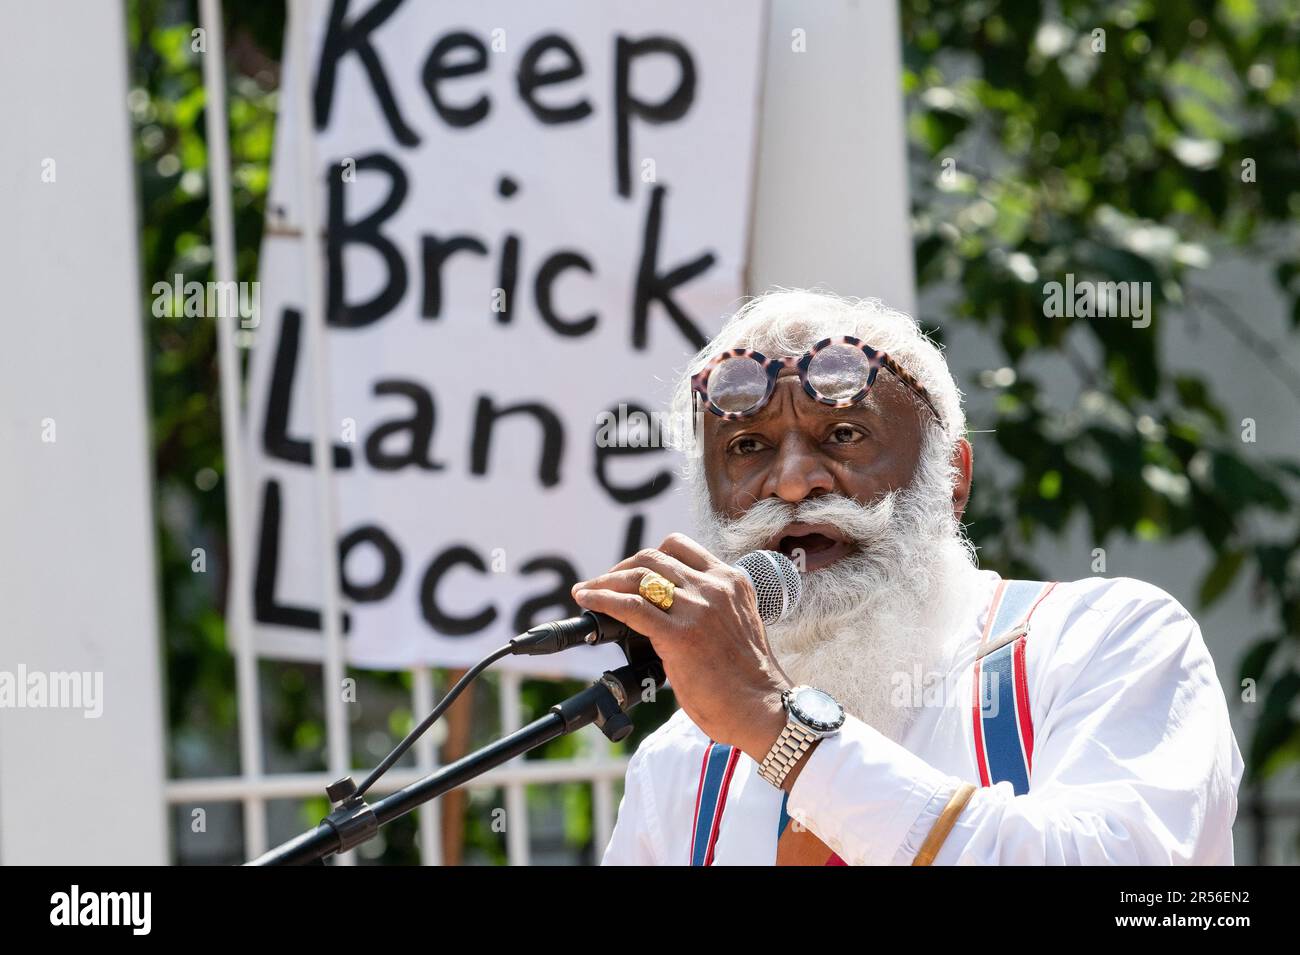 Writer and local resident Suresh Singh talks at a rally against plans to build shops and offices on the Truman Brewery site in Brick Lane, London. Stock Photo